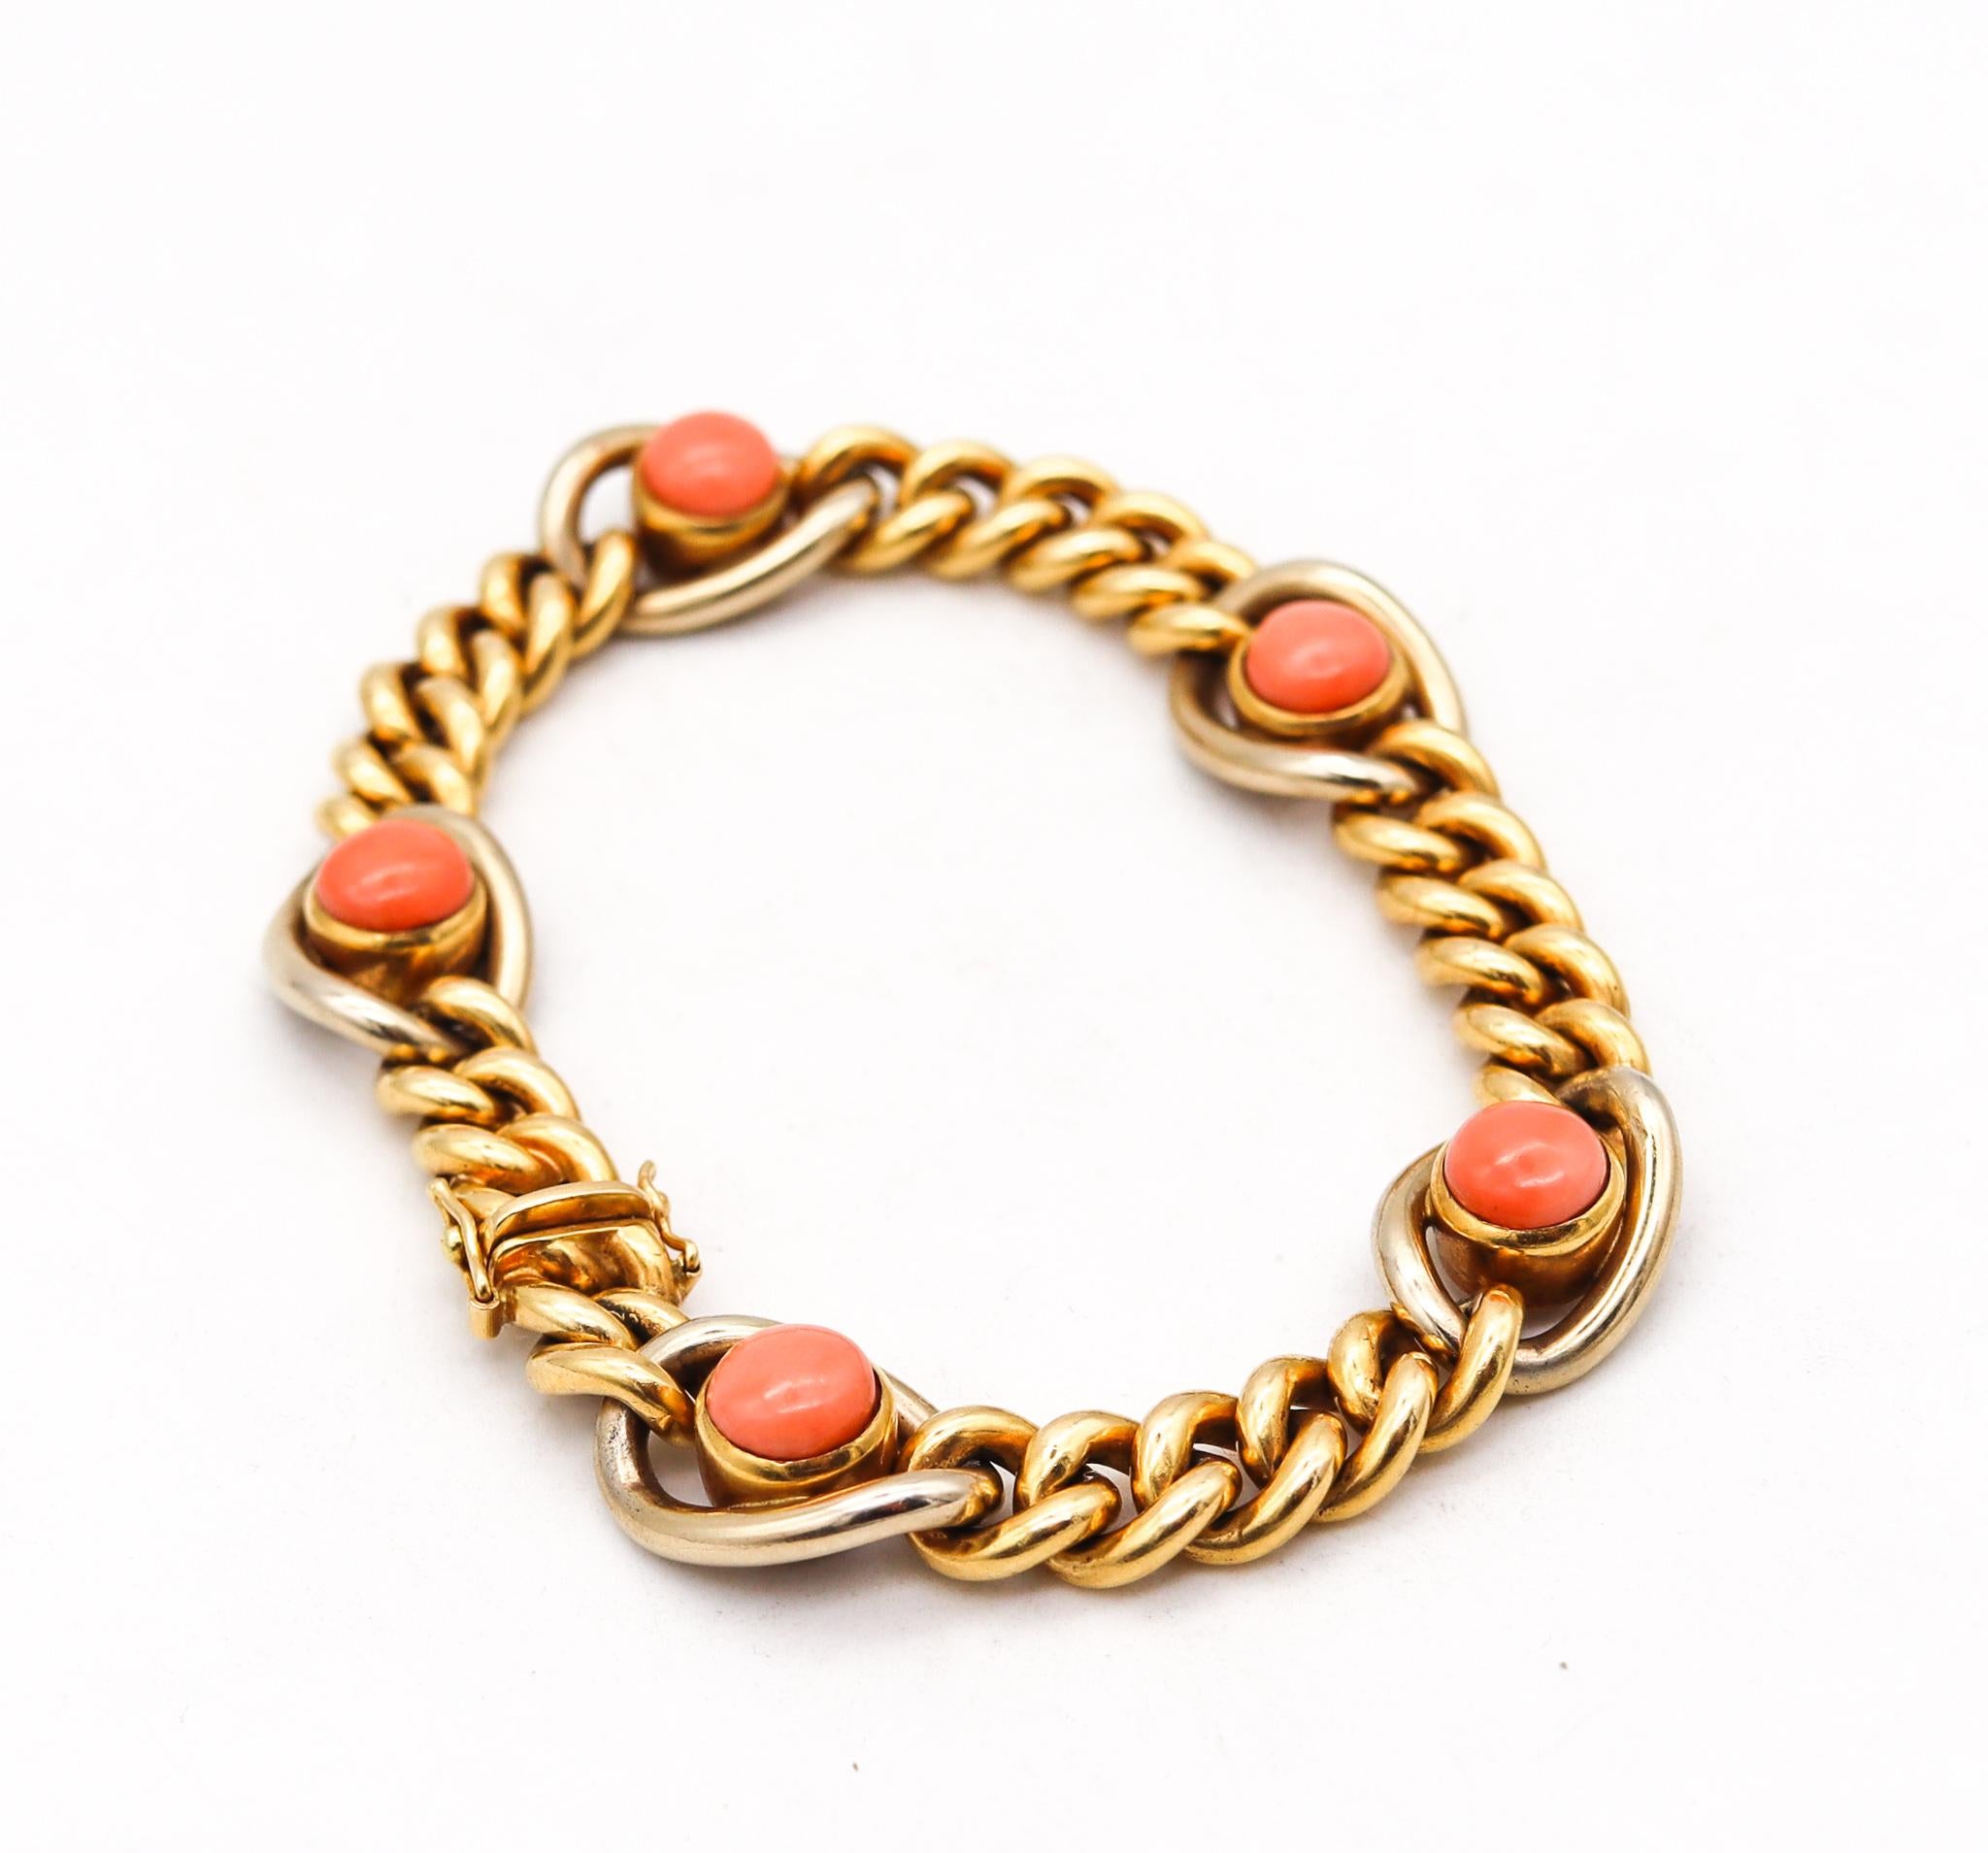 A stations bracelet designed by Carlo Weingrill.

Beautiful statement piece, created in Verona Italy at the jewelry atelier of Carlo Weingrill, back in the late 1960's. This station links bracelet has been crafted in solid yellow gold of 18 karats